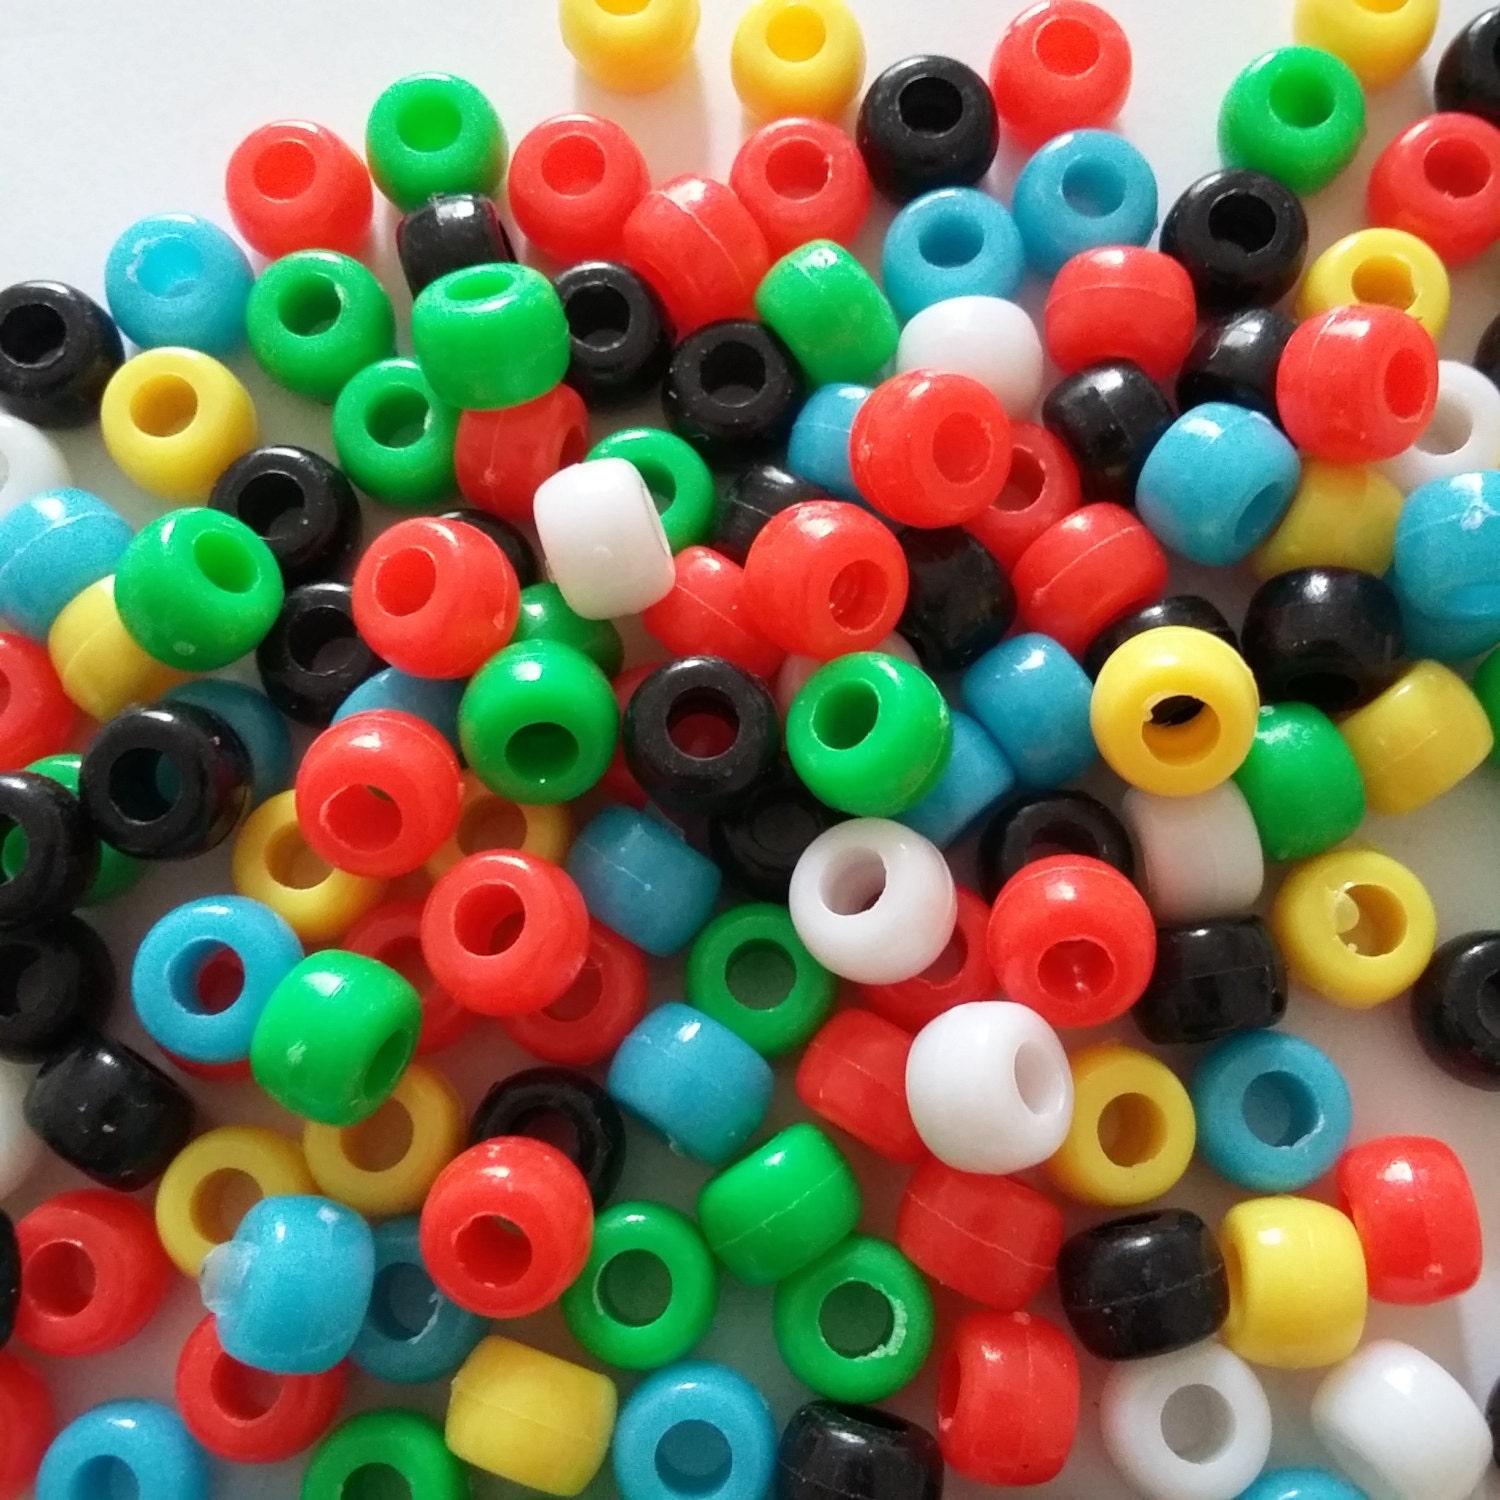 480PCS Pony Beads Letter Bead Kit Rainbow Beads Plastic Bead for Craft 6 x  9mm 24 Colors Large Hole Beads Set for Bracelets Jewelry Making by  Christmas Present